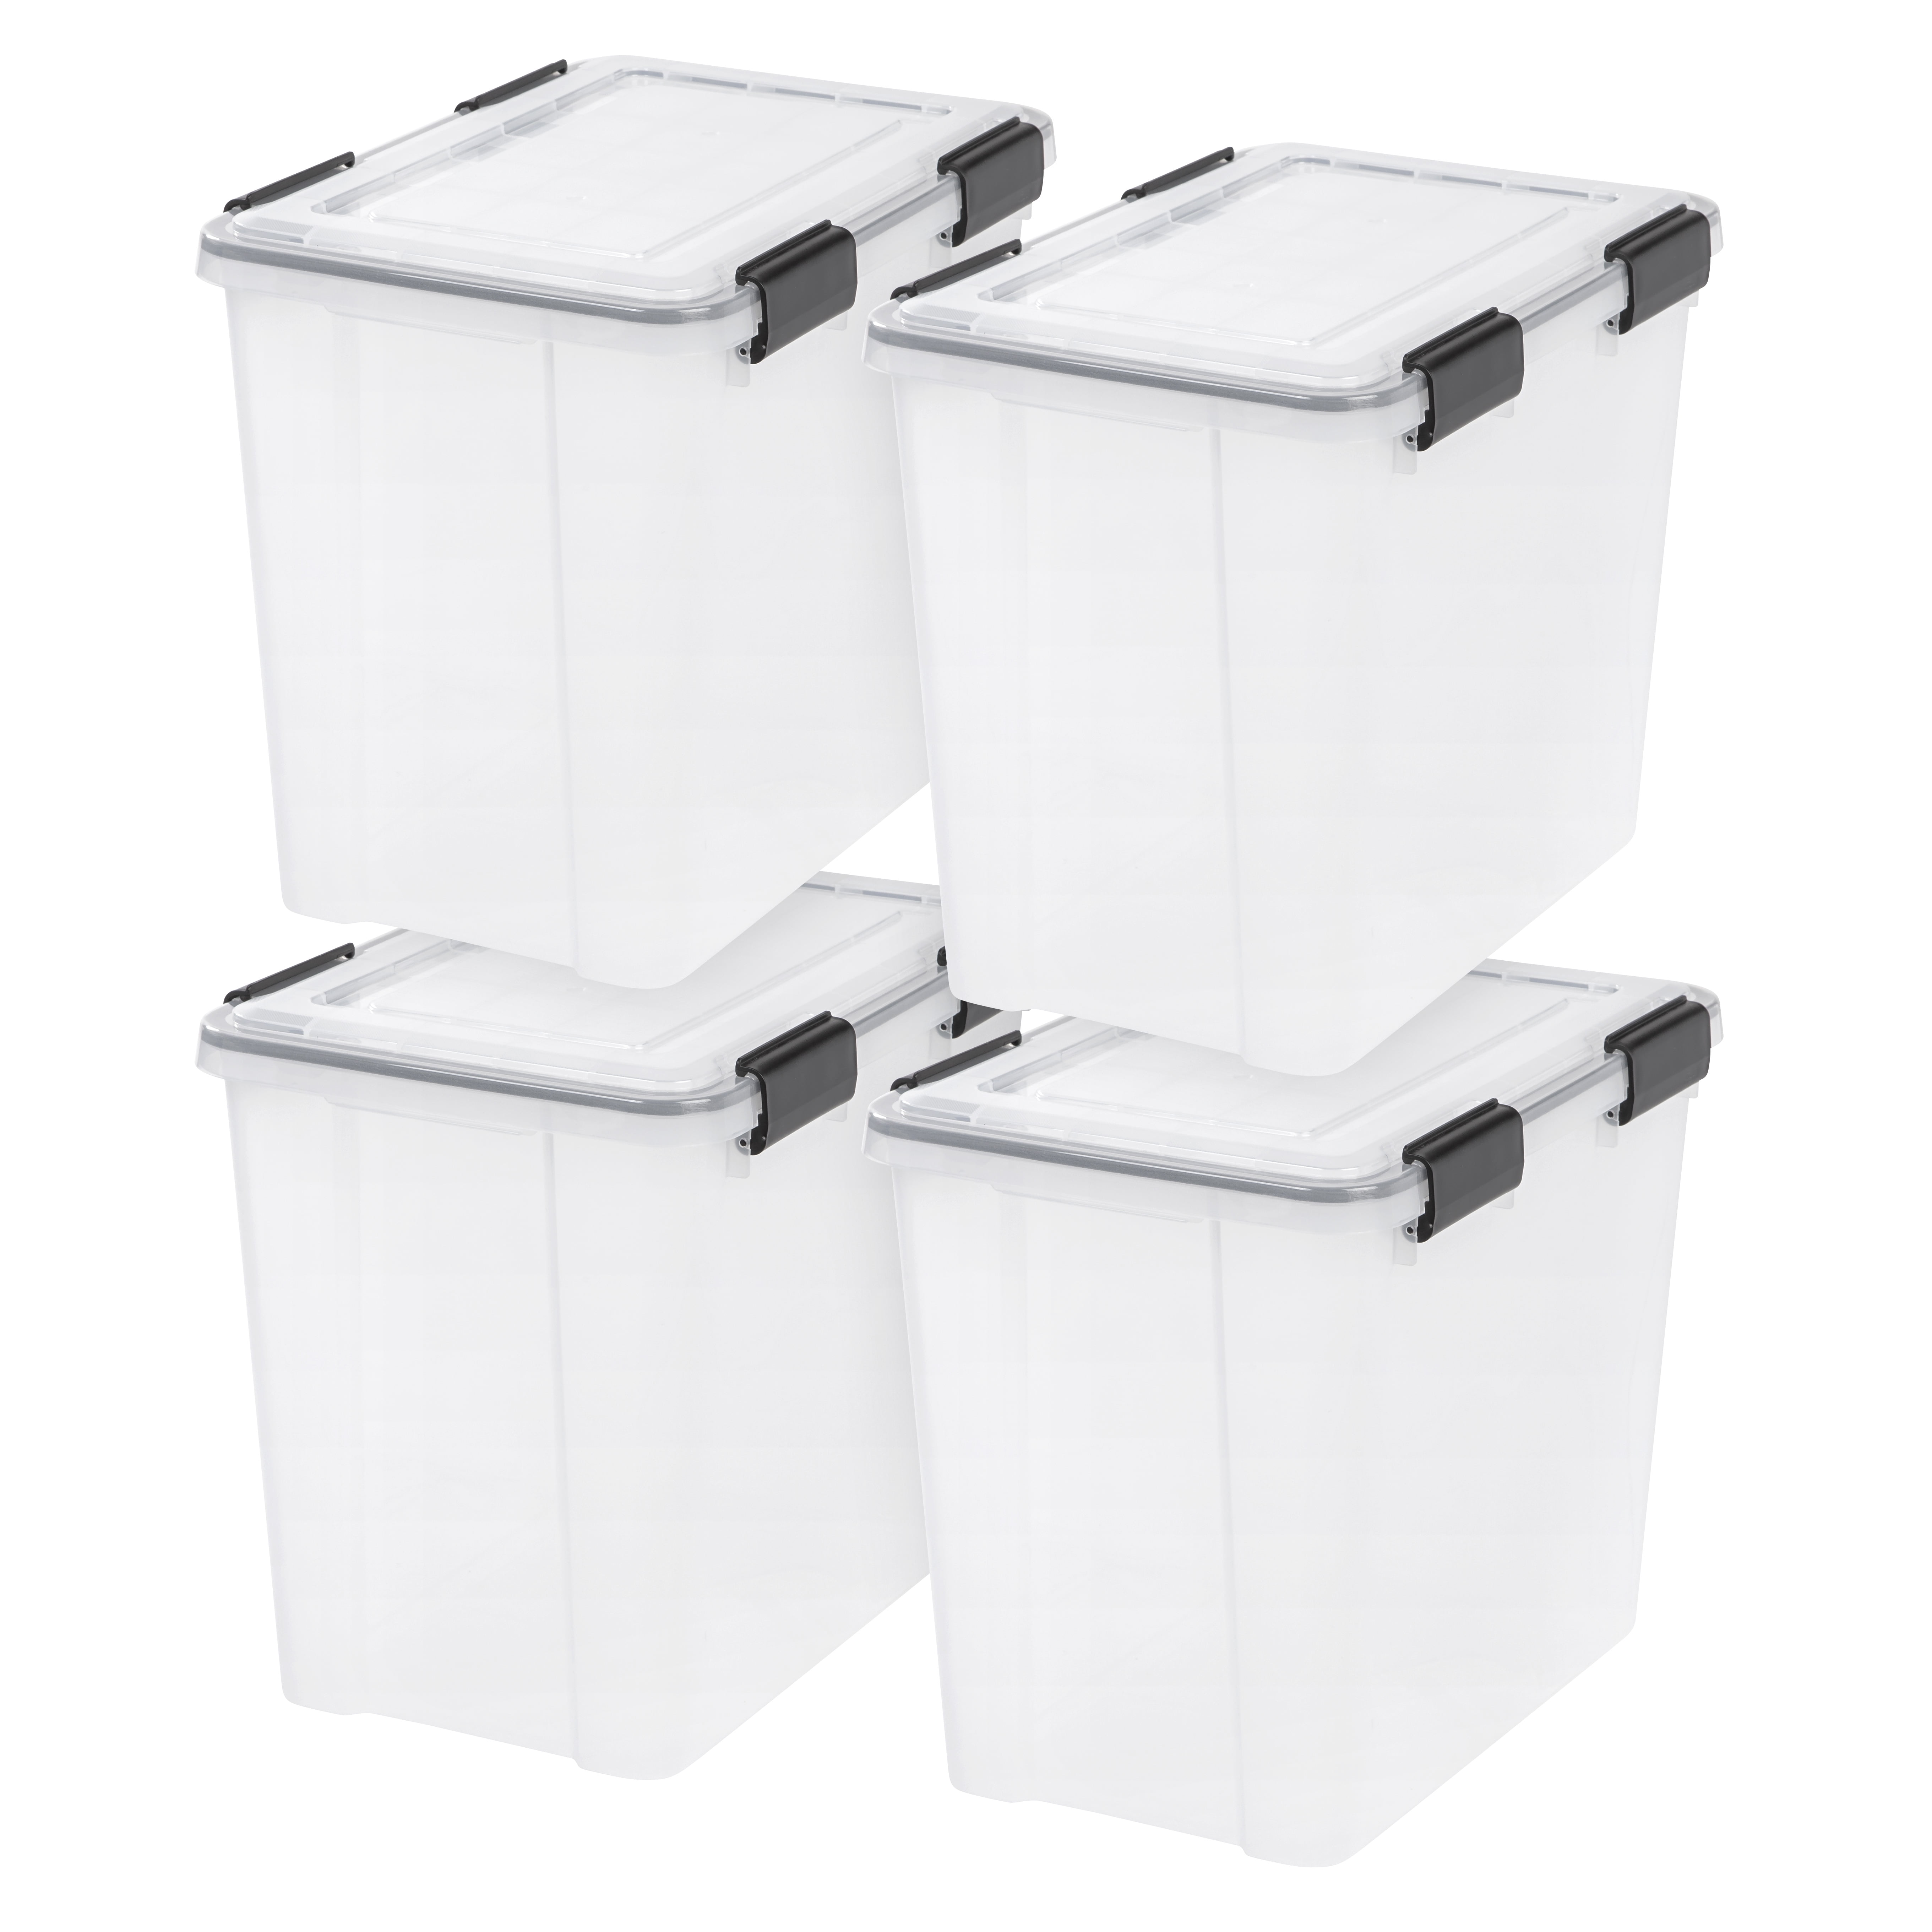 4 Pack IRIS USA Weathertight 74 Quart Buckle Down Storage Box Container Clear 